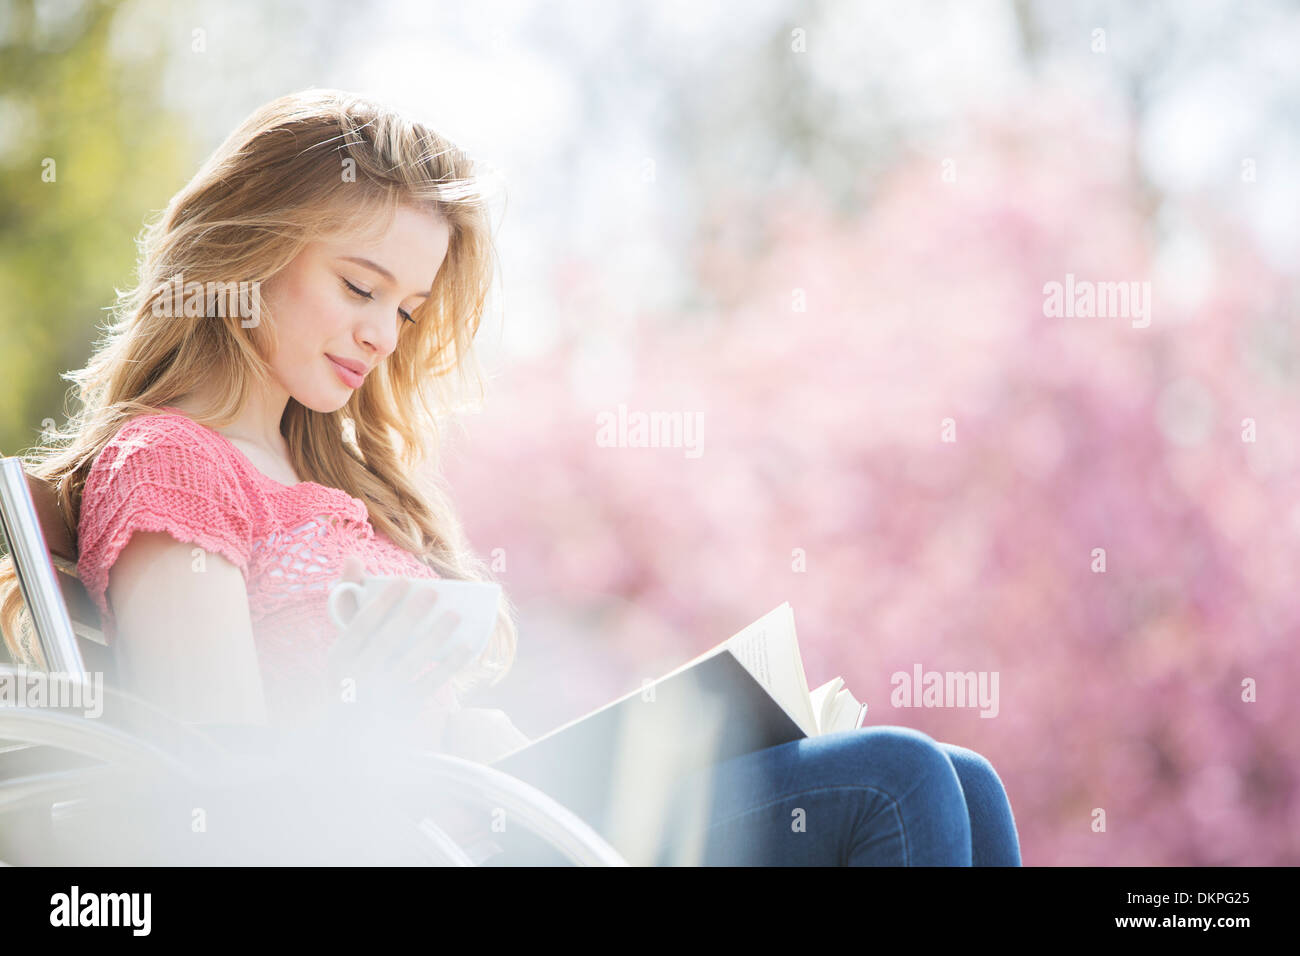 Woman Reading book on park bench Banque D'Images